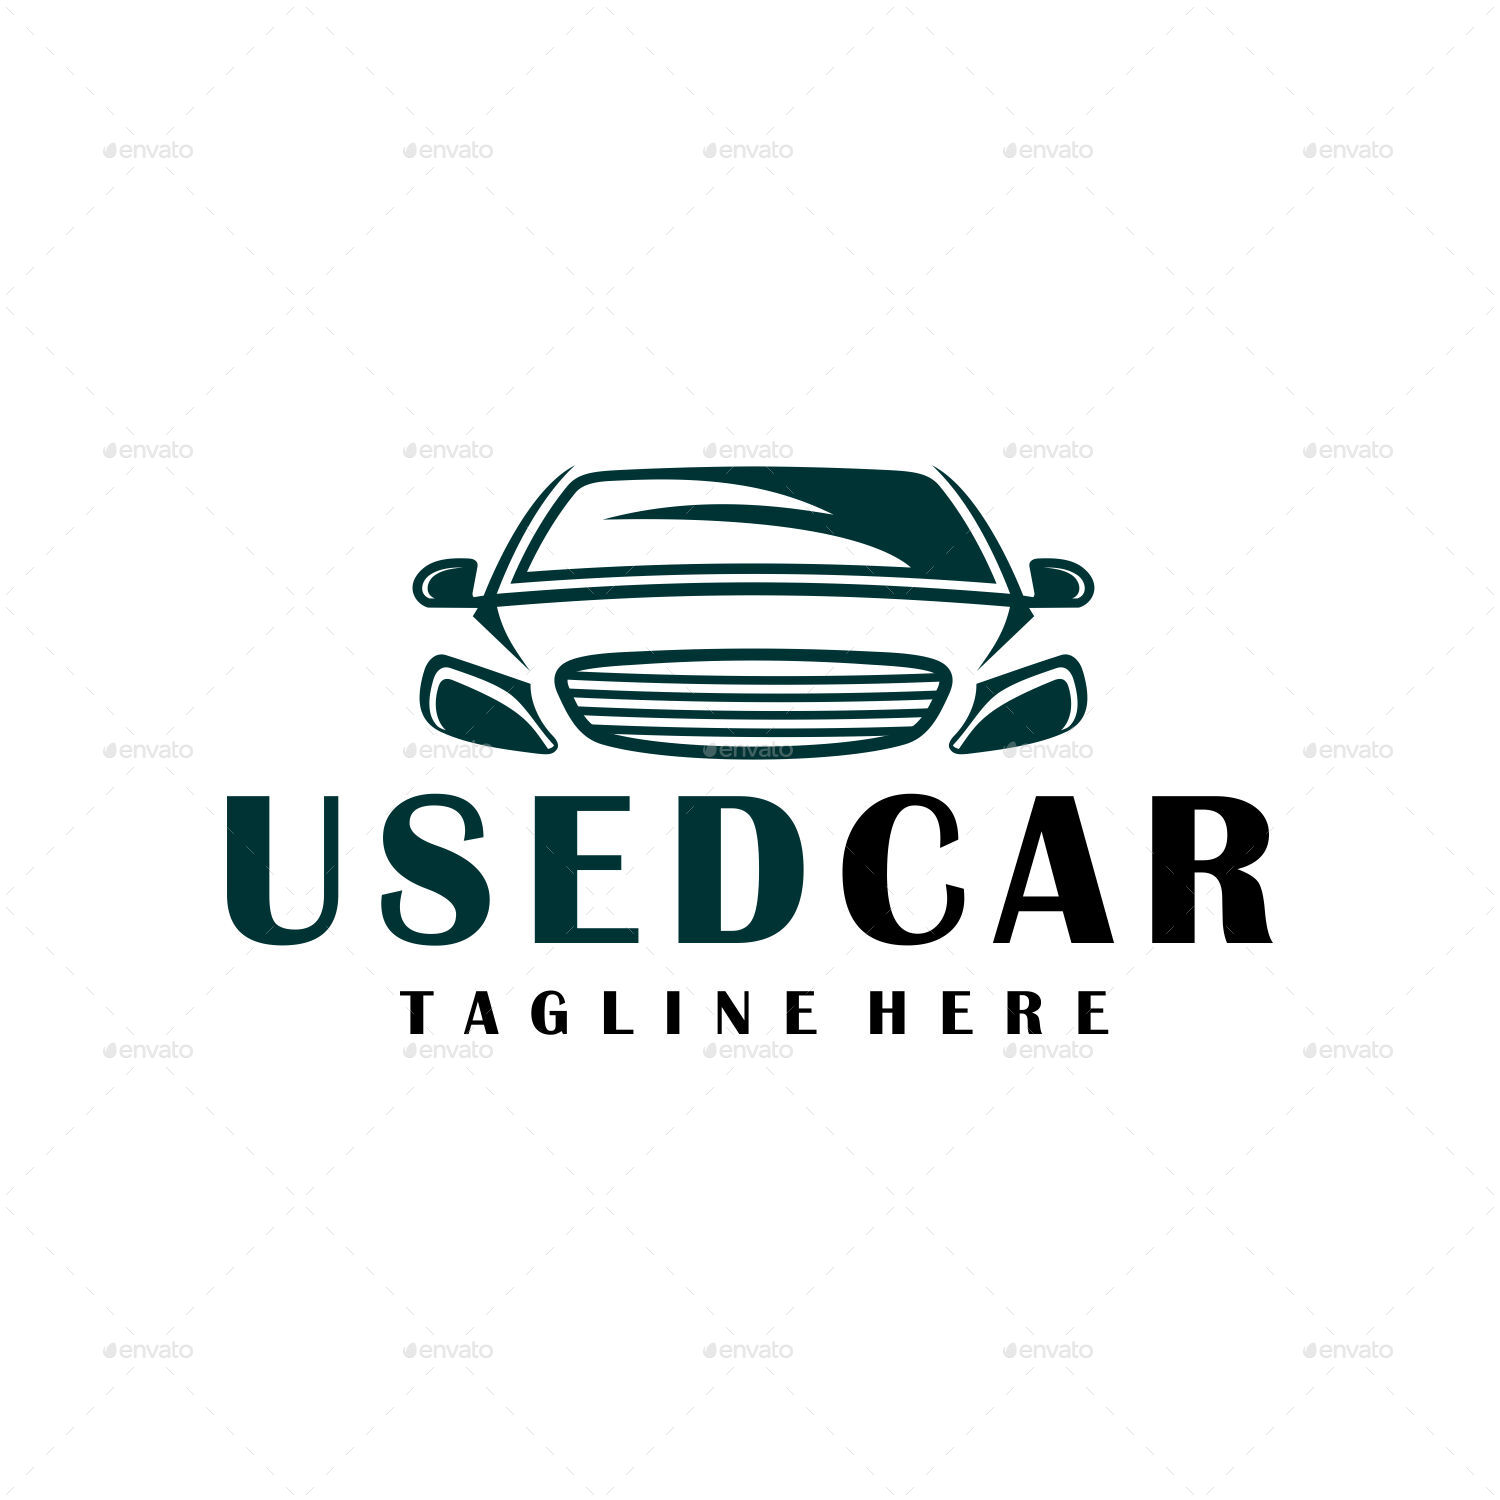 Used car logo by anto_82 | GraphicRiver